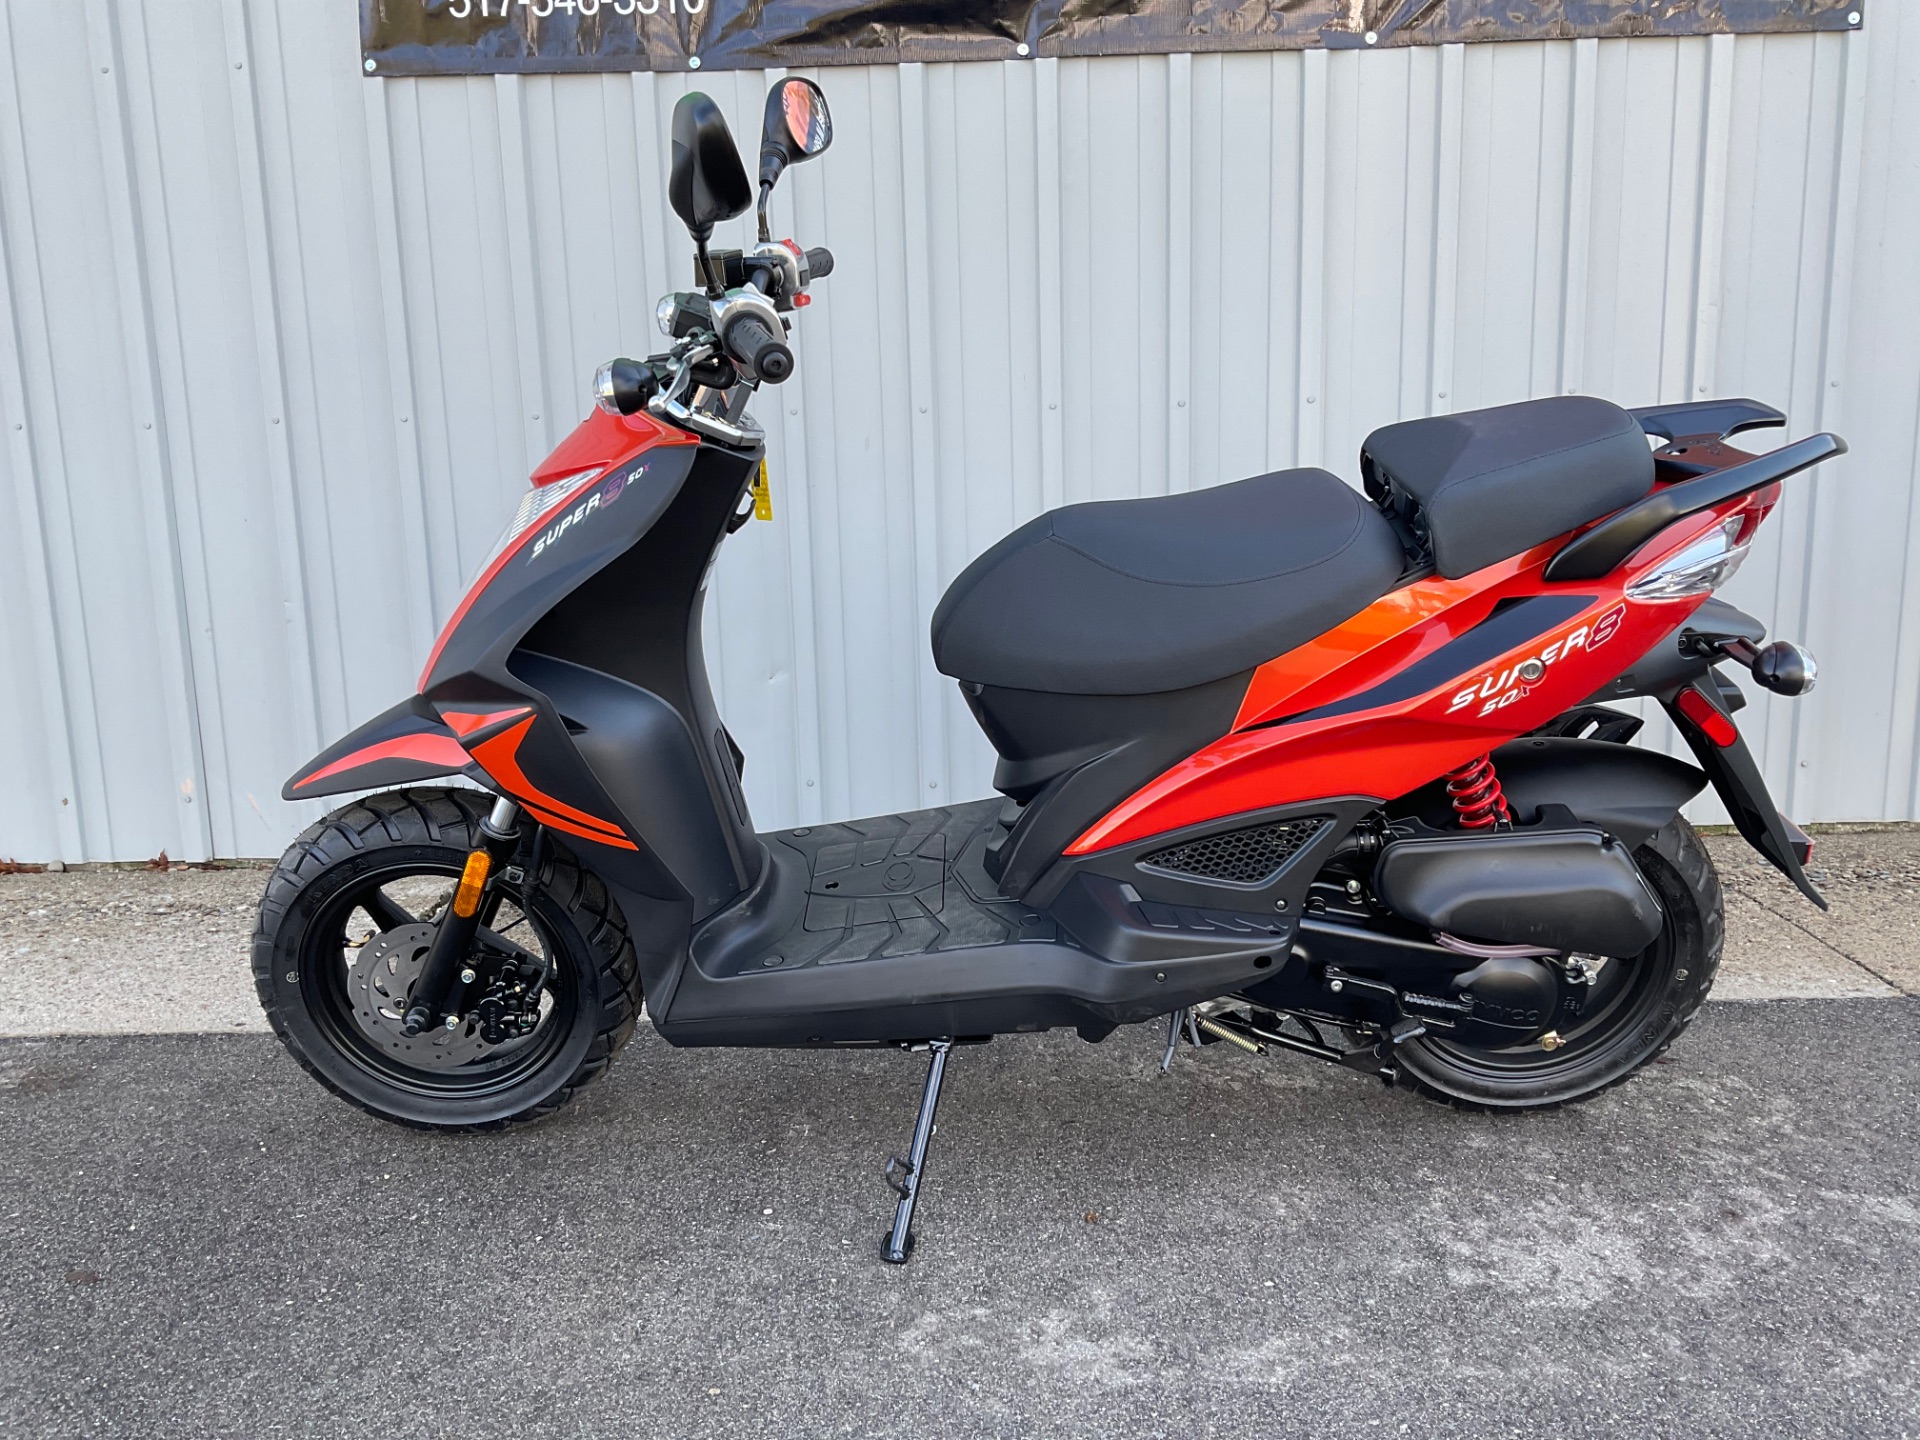 2023 Kymco Super 8 50X in Howell, Michigan - Photo 2